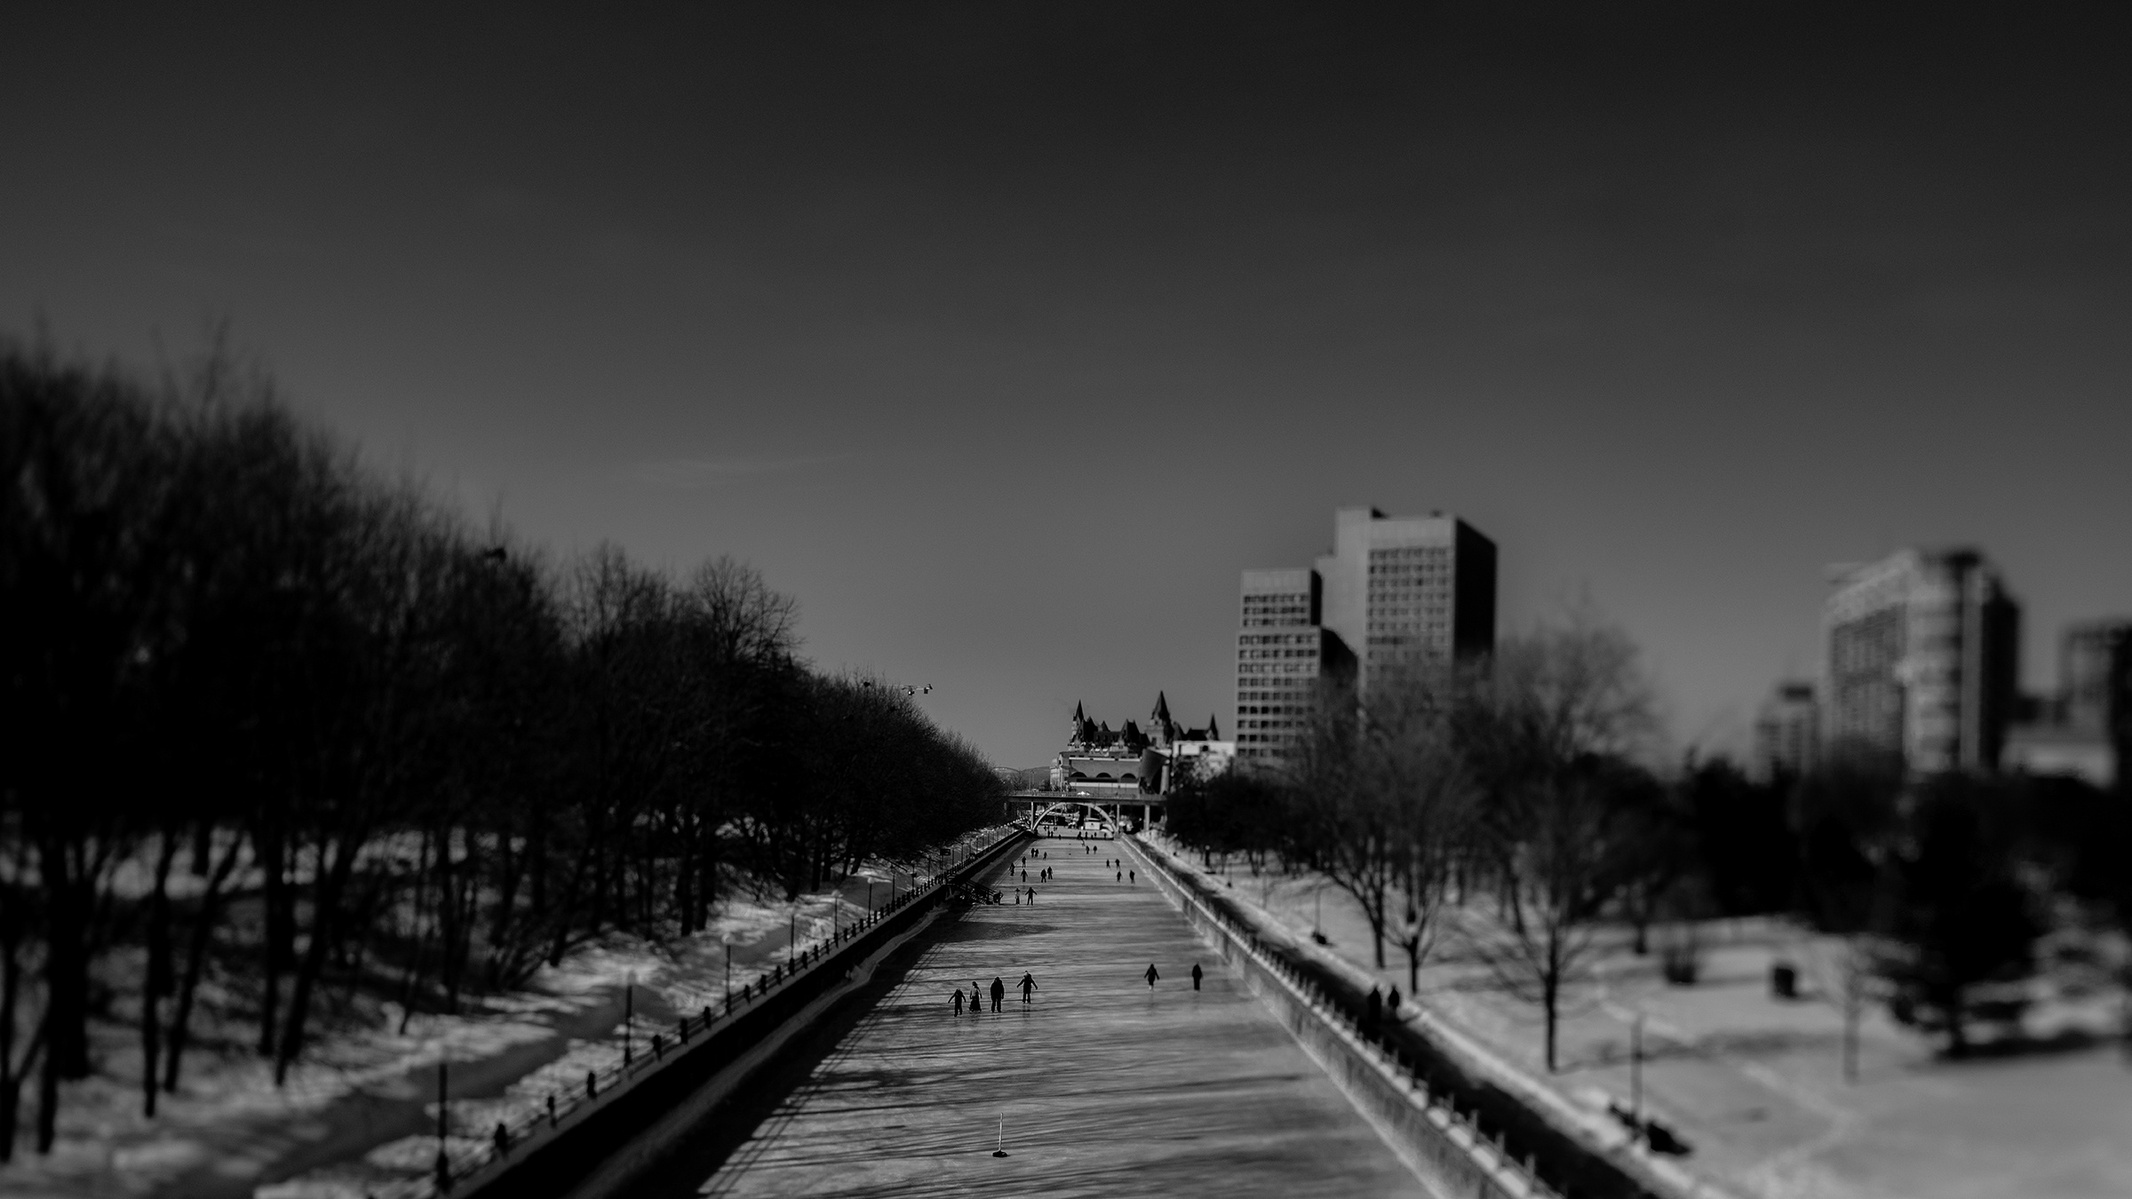 Rideau Canal skaters in black and white with Chateau Laurier in background from Tappers Bridge